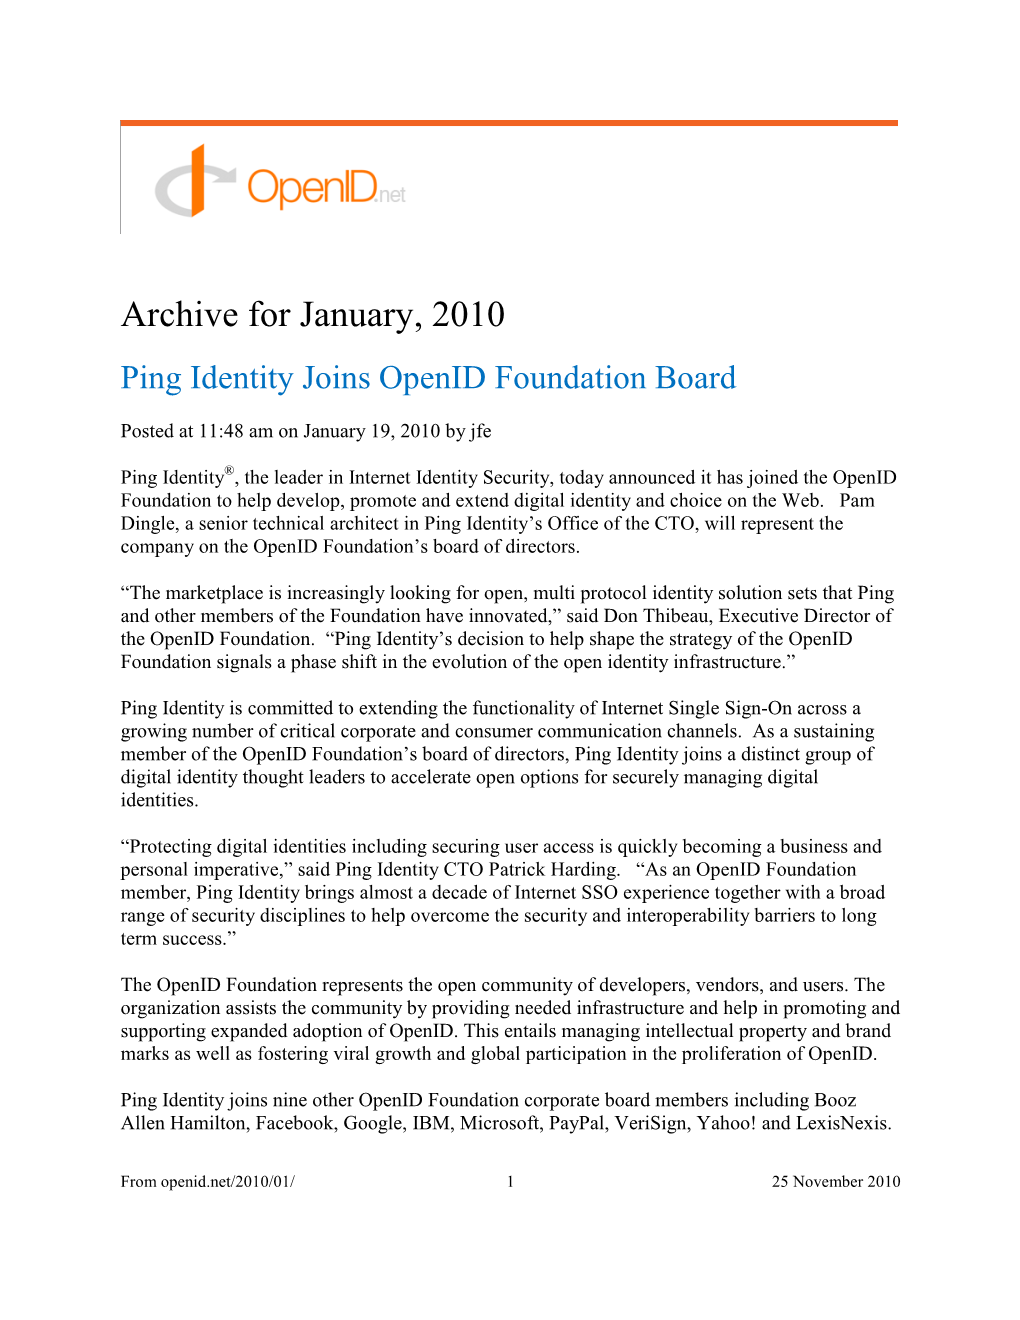 Archive for January, 2010 Ping Identity Joins Openid Foundation Board